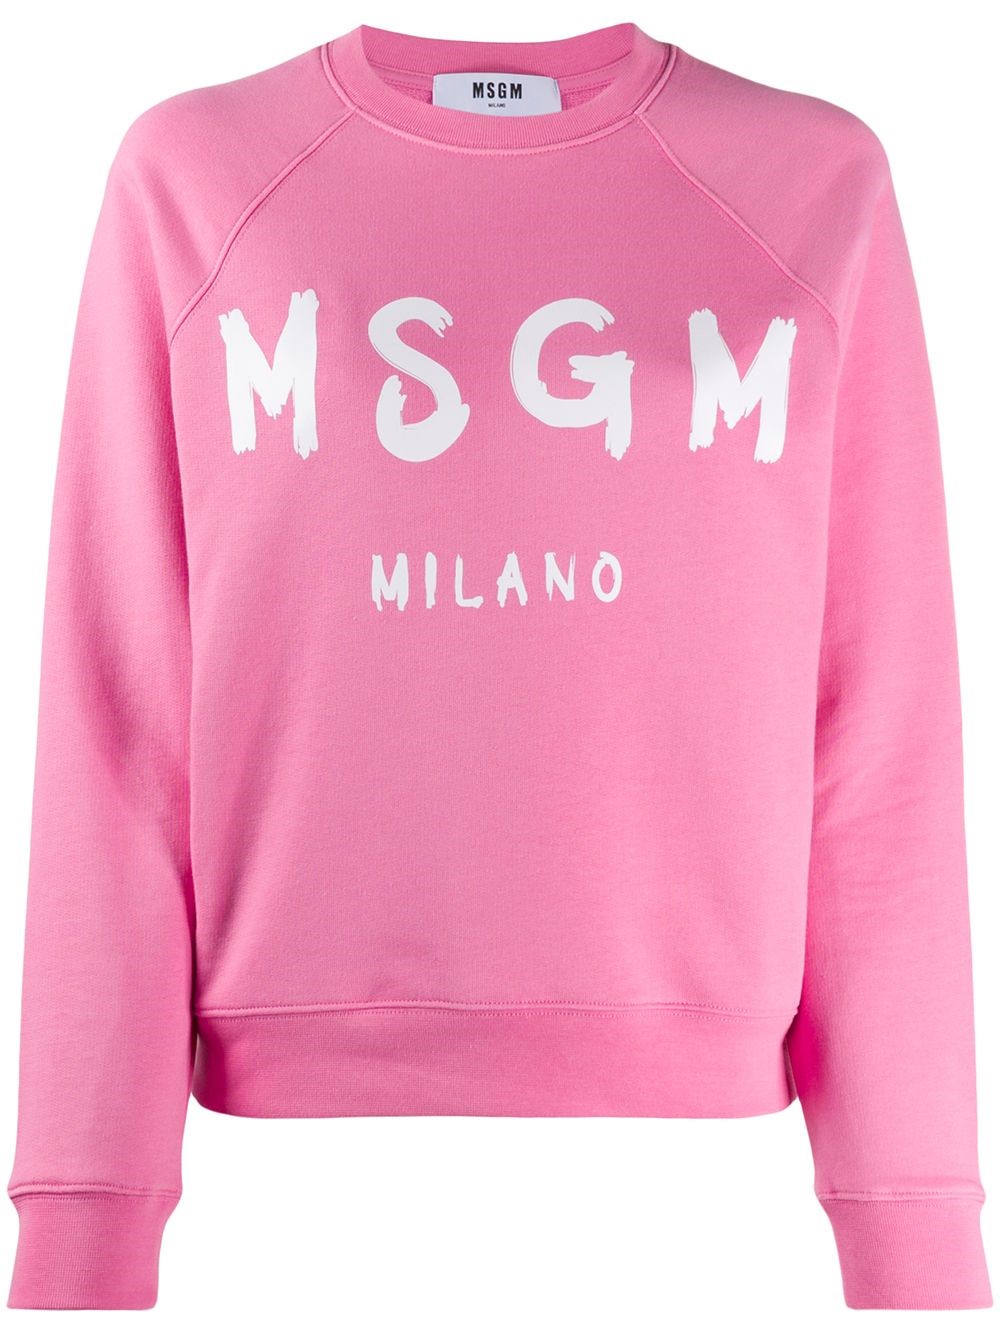 msgm LOGO SWEATER available on montiboutique.com - 32556